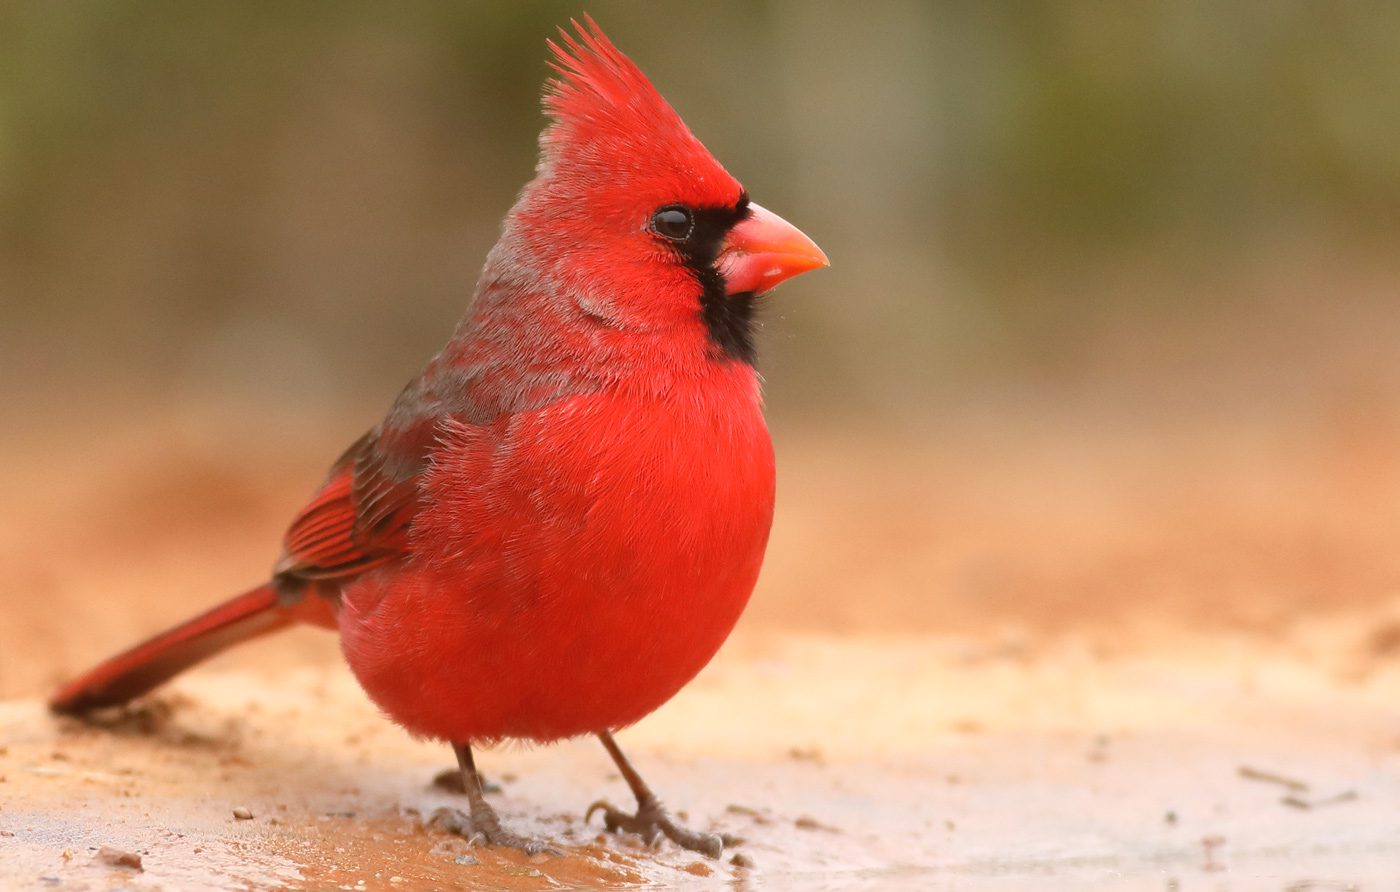 A bright red bird with a crest and a black mask and red bill stands on a muddy ground.